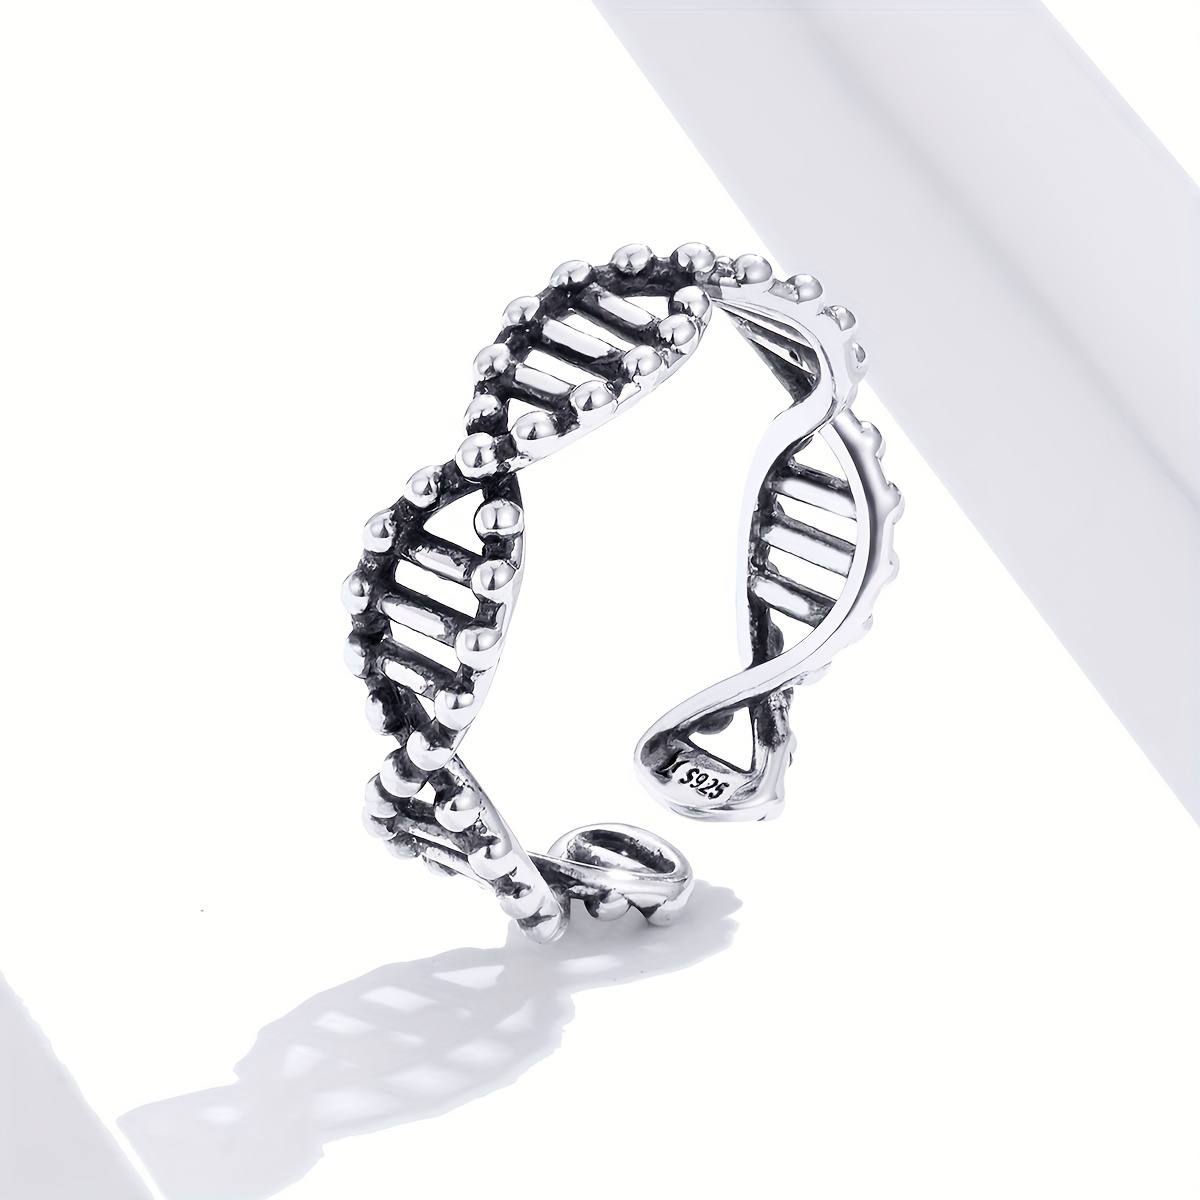 925 Sterling Silver Ring Embracing Design Adjustable Cuff Ring